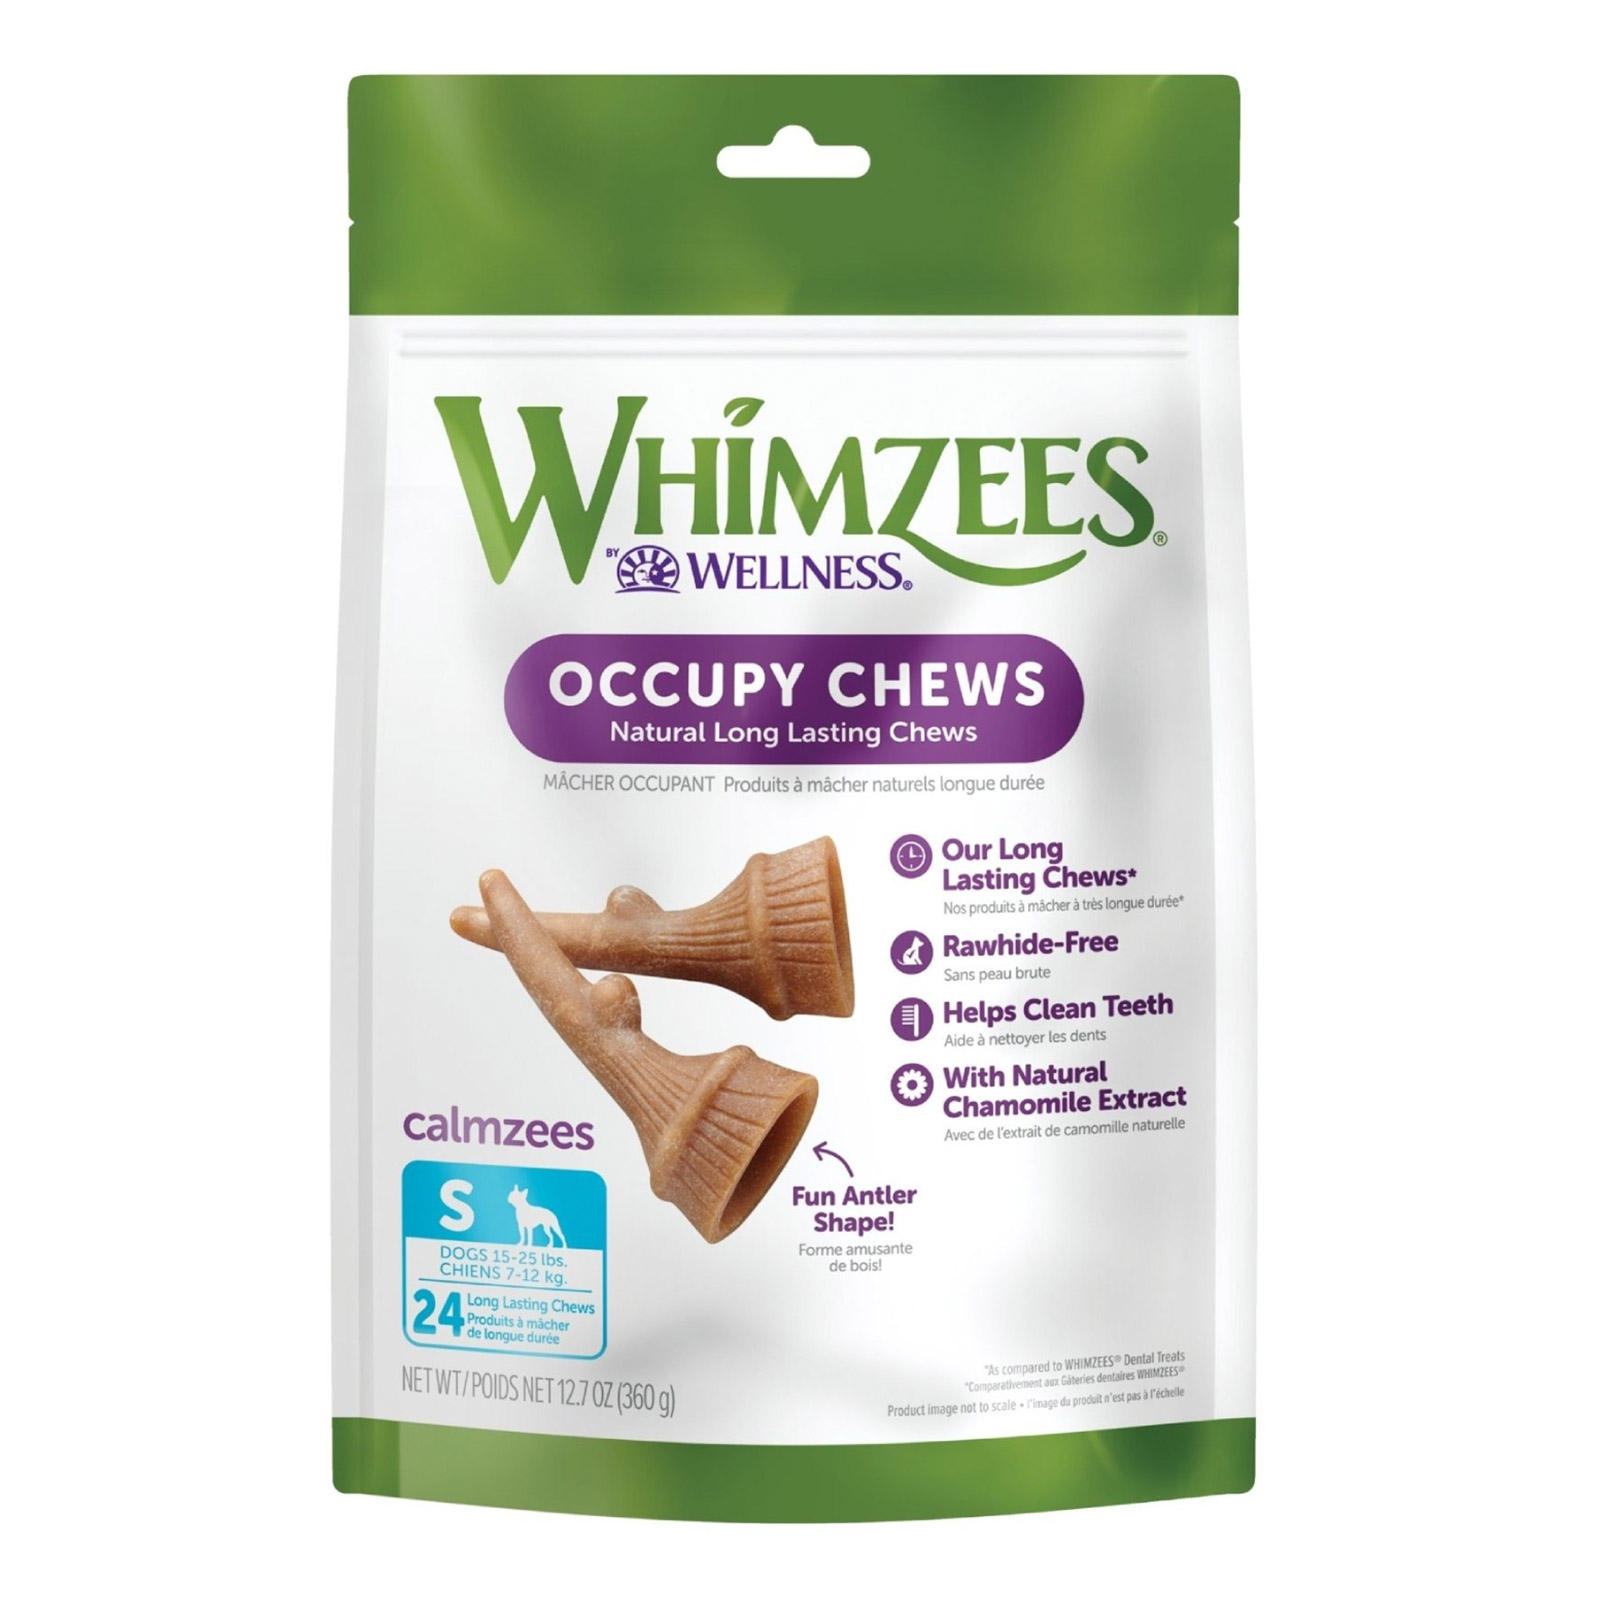 Whimzees Occupy Calmzees Antler Value Bag Dog Dental Treats Small